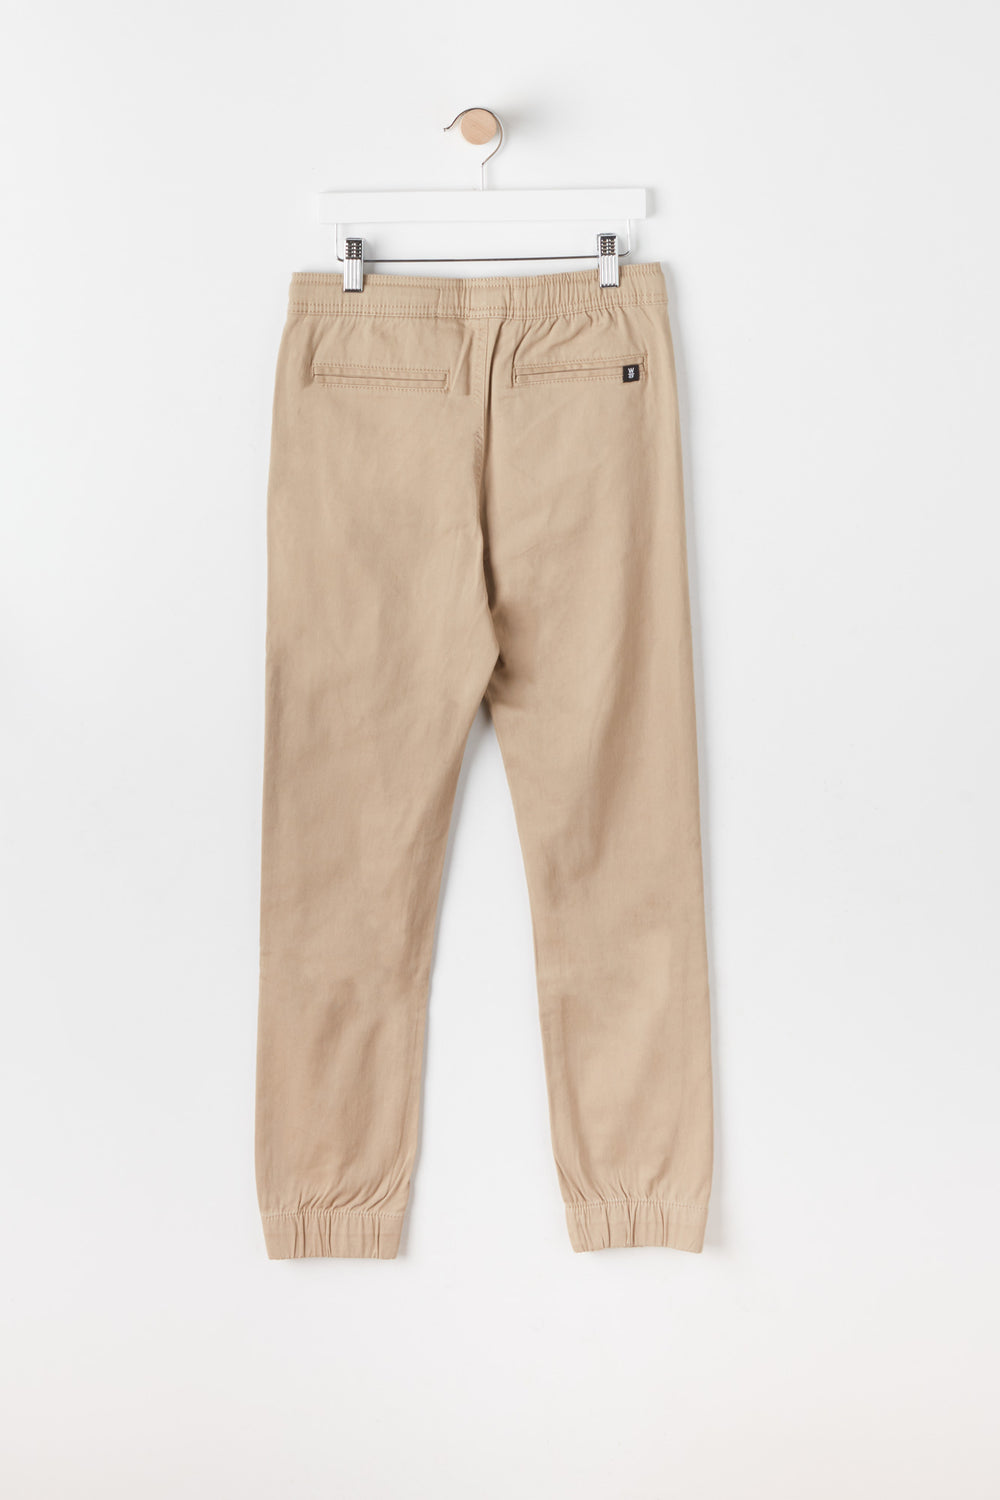 West49 Youth Solid Basic Jogger West49 Youth Solid Basic Jogger